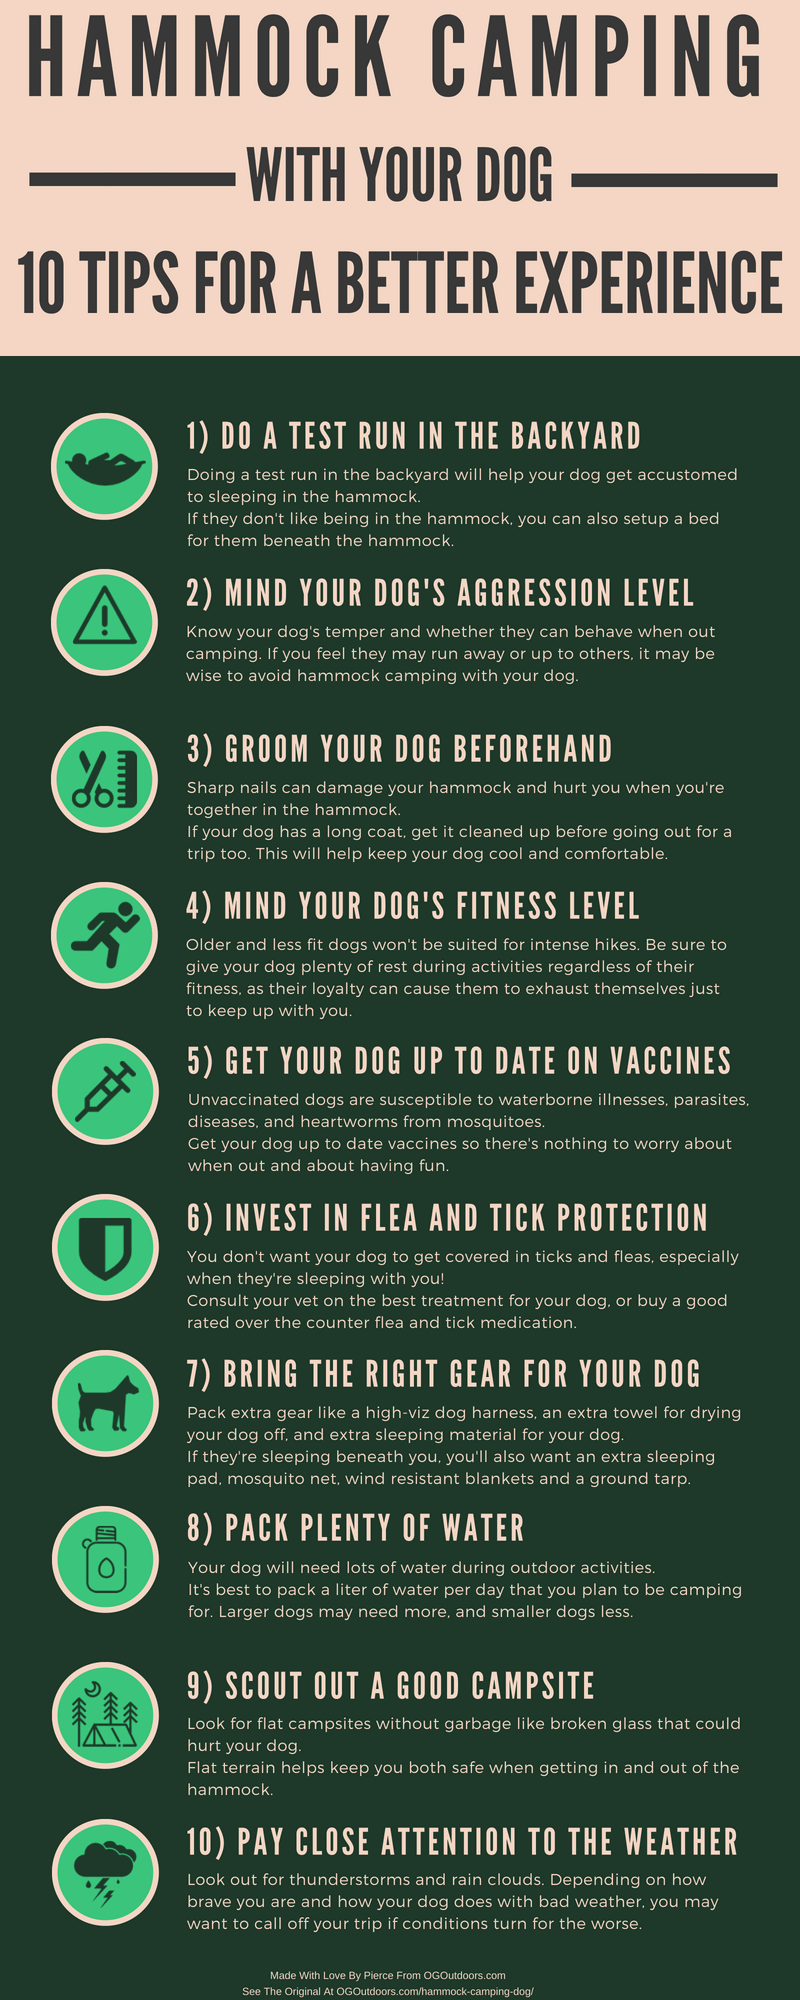 hammock-camping-with-dog-infographic